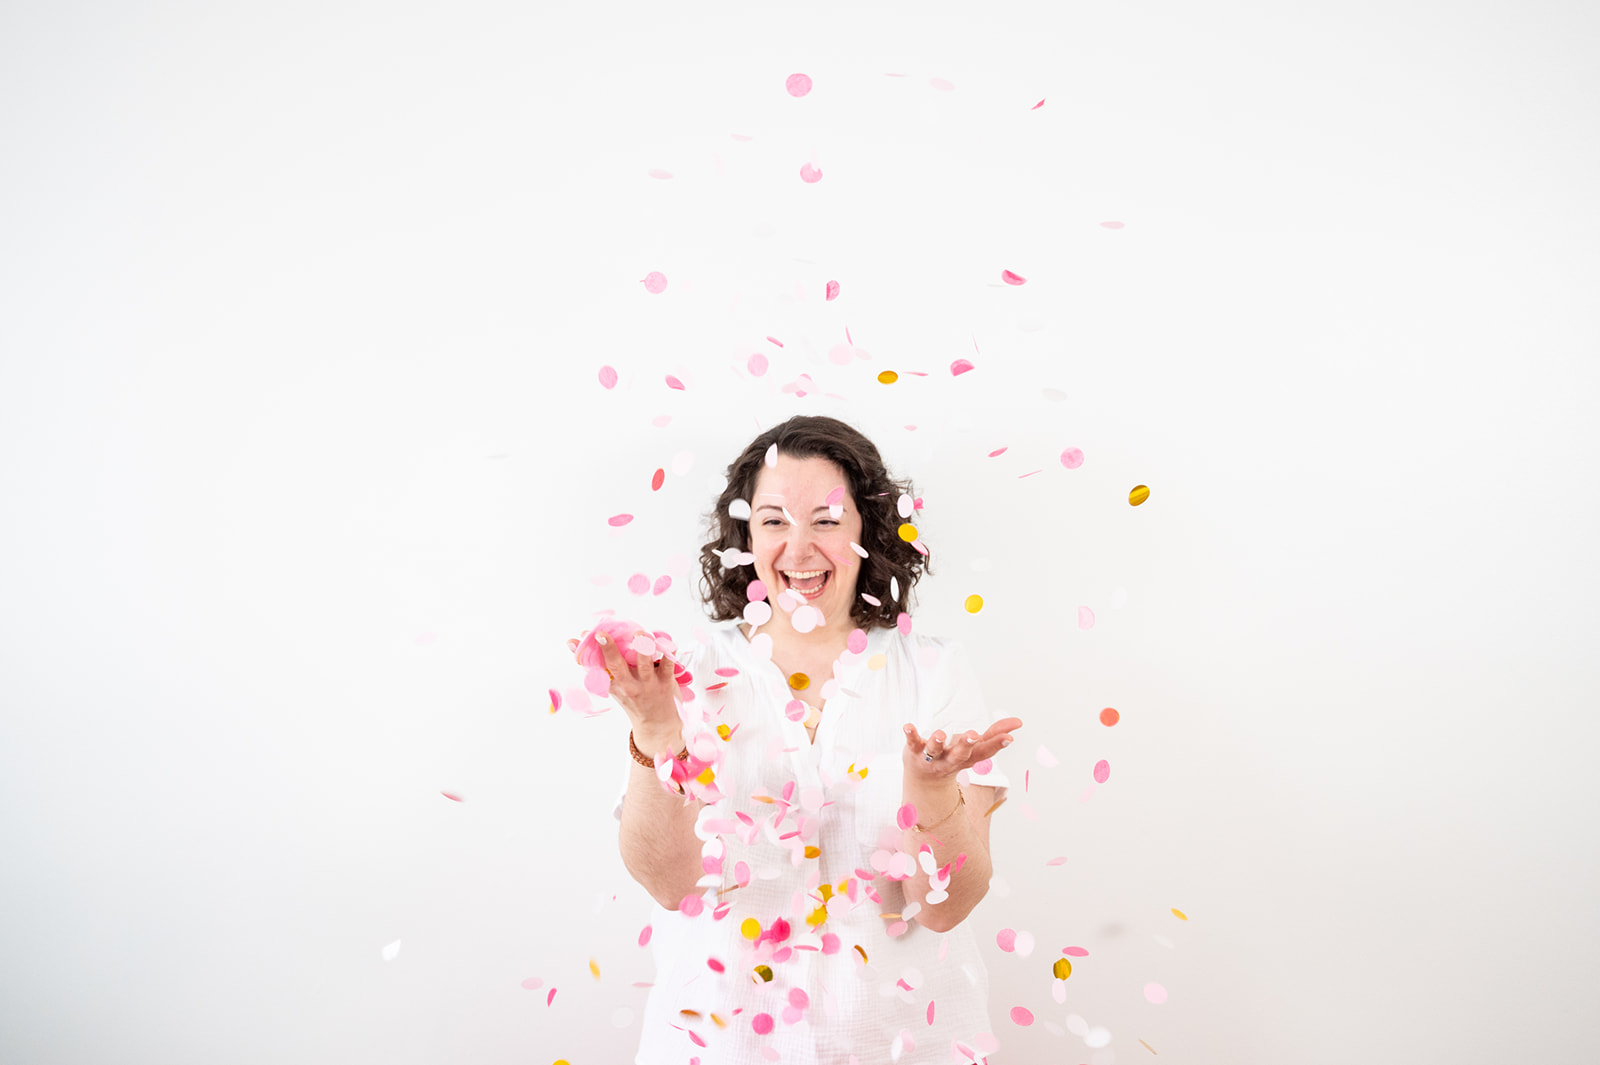 Woman throwing pink confetti and laughing on her natural Ottawa lifestyle brand photo shoot